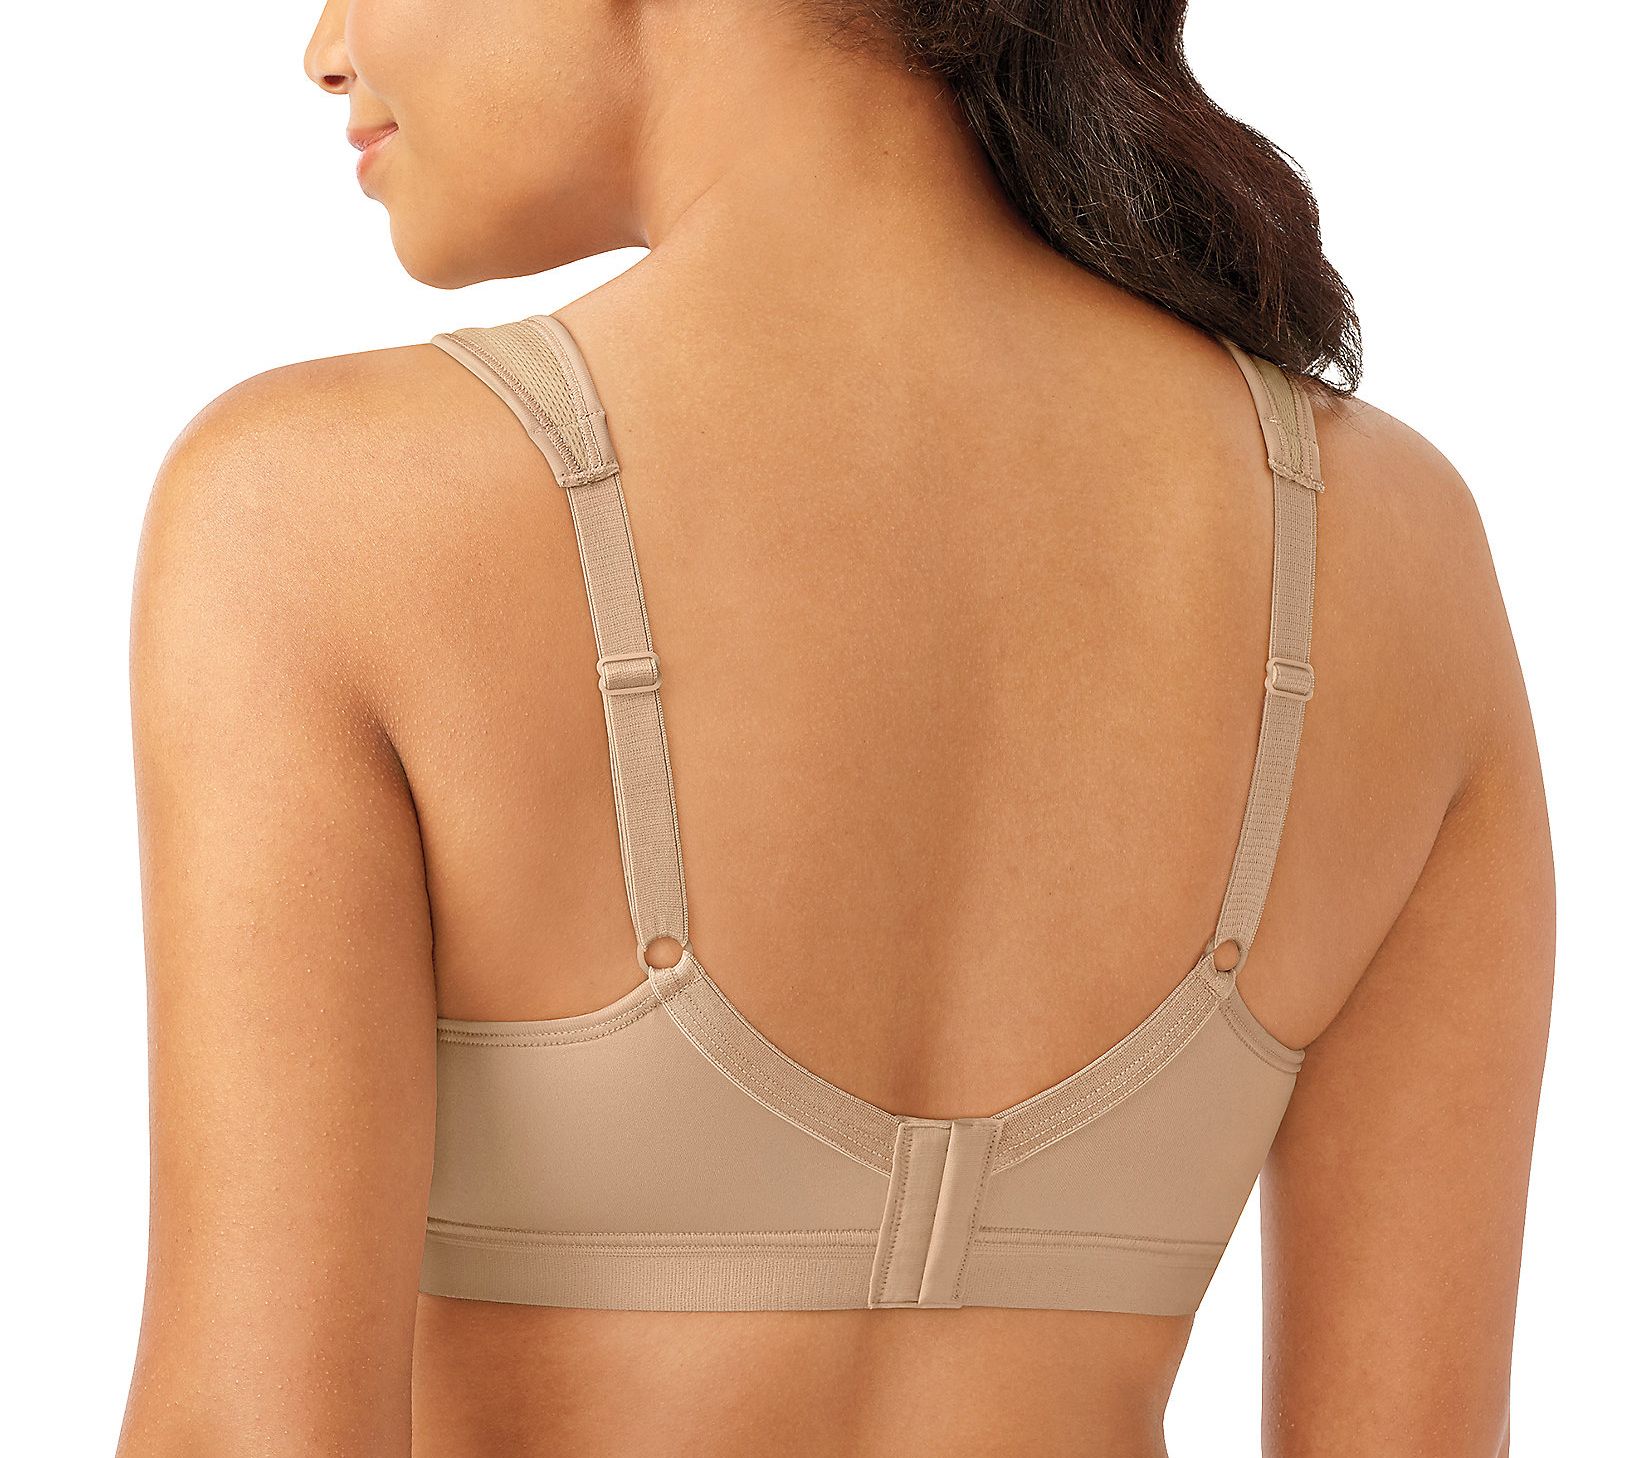 Hanes: Ends tonight: up to 60% off Bali, Playtex & Maidenform bras